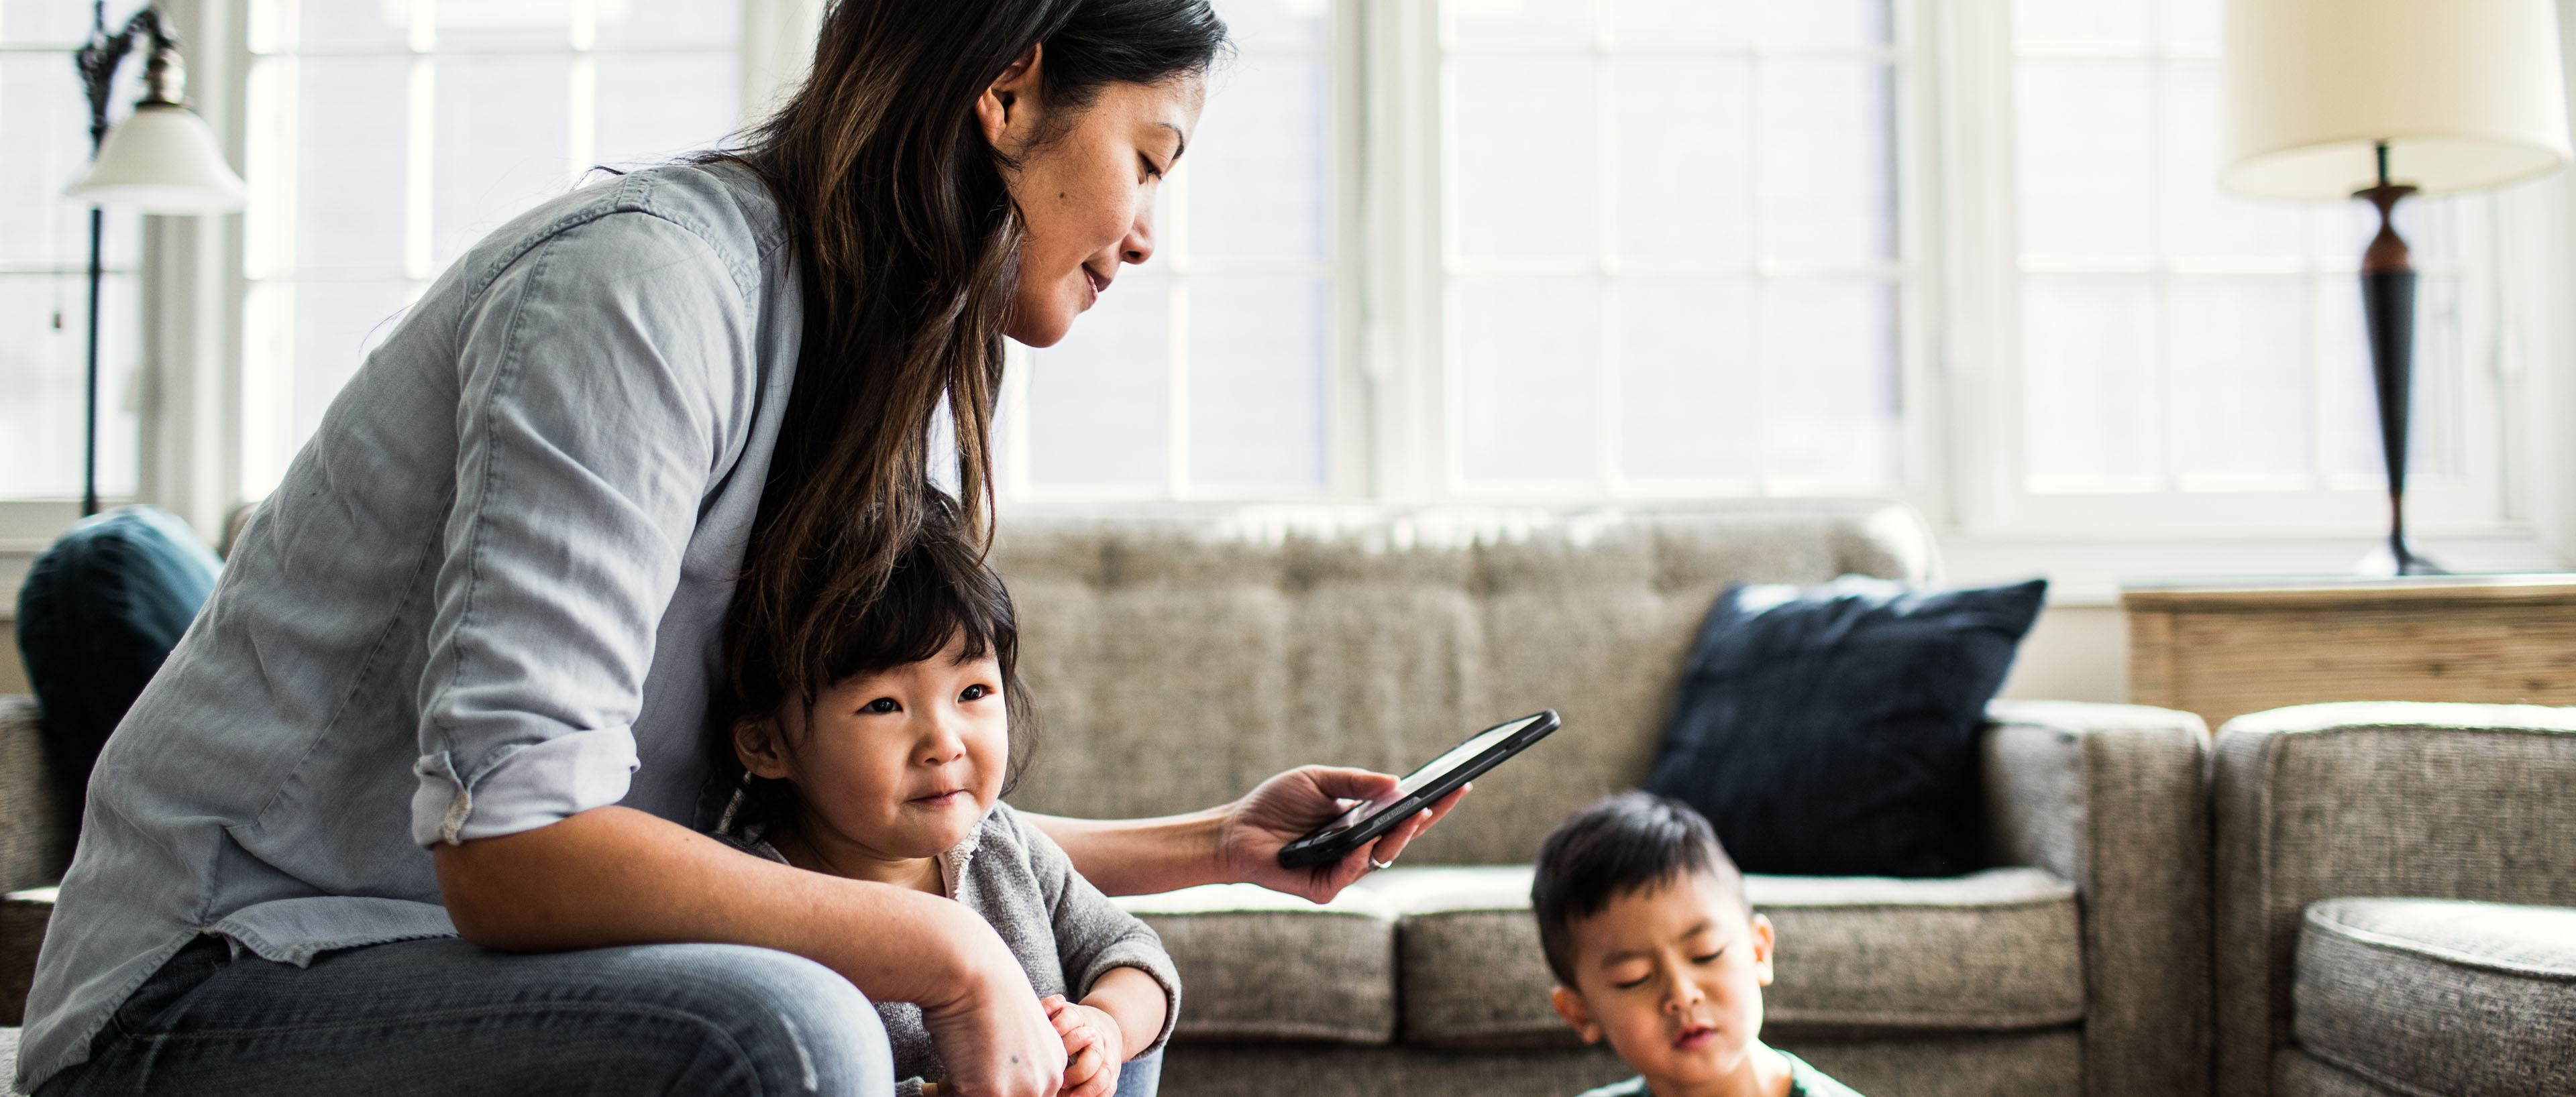 Mother using smartphone with children present  